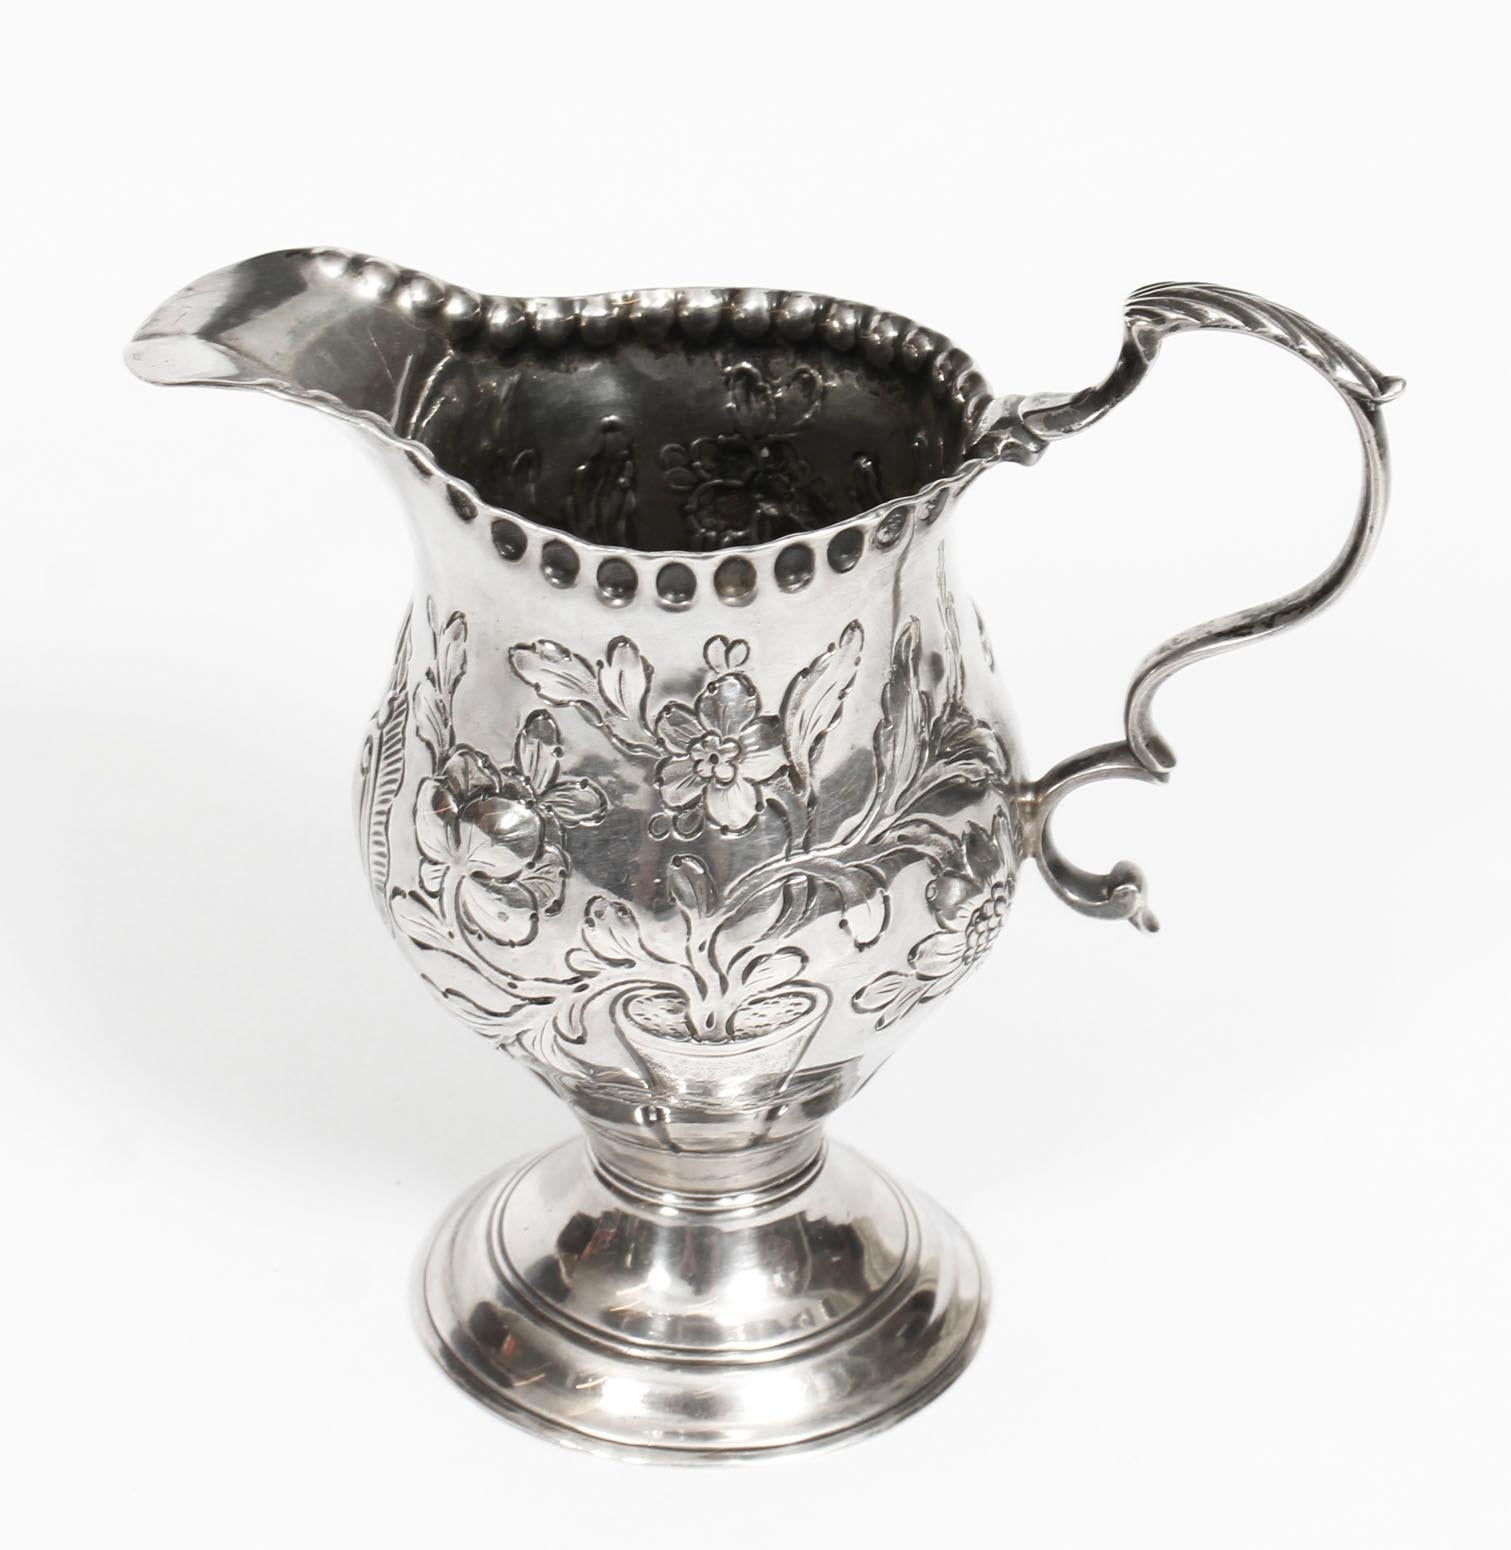 This is a wonderful English antique George III sterling silver cream jug with hallmarks for London 1770.

The beautiful helmet shaped jug is further decorated with embossed tubs of flowers. The blank central cartouche is ready for your own